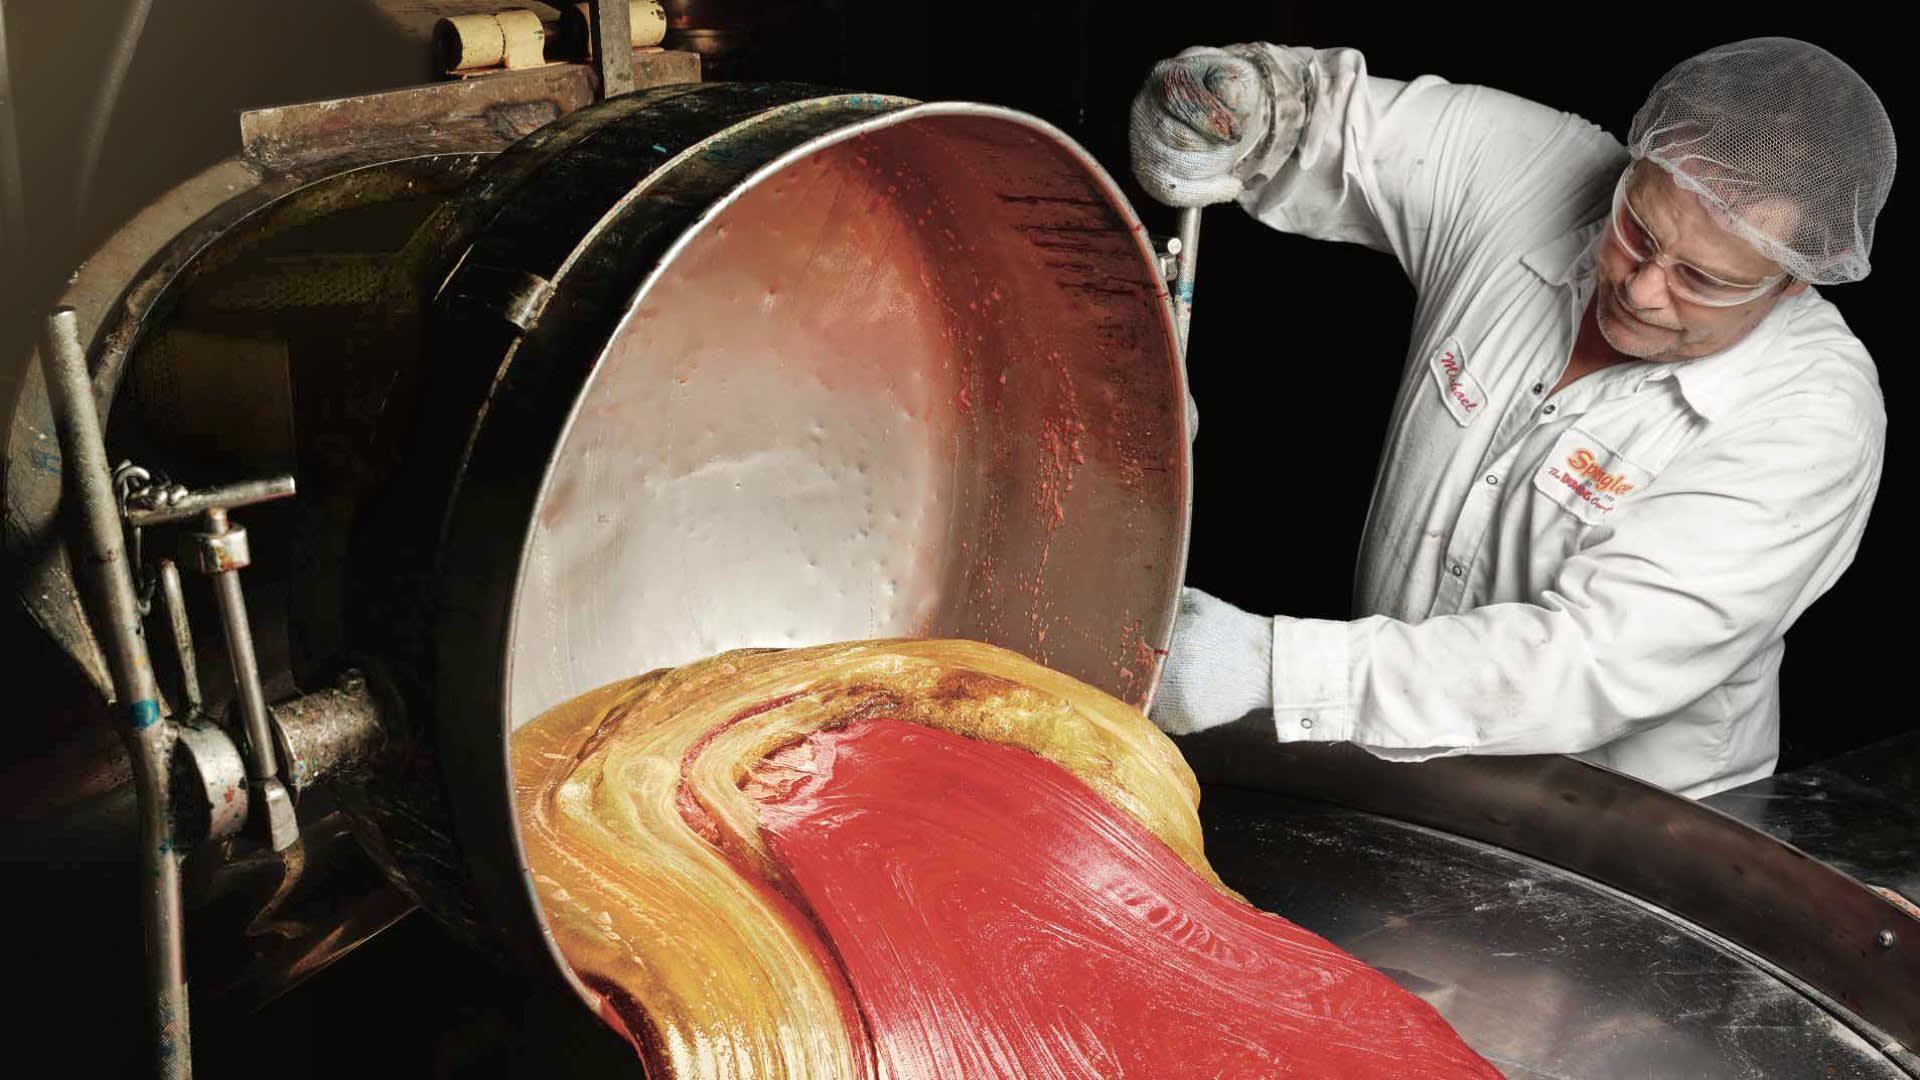 This colorful goo will soon become a batch of Dum- Dums lollipops. Spangler pumps out 12 million each day and three billion every year. The brand remains its bestseller.